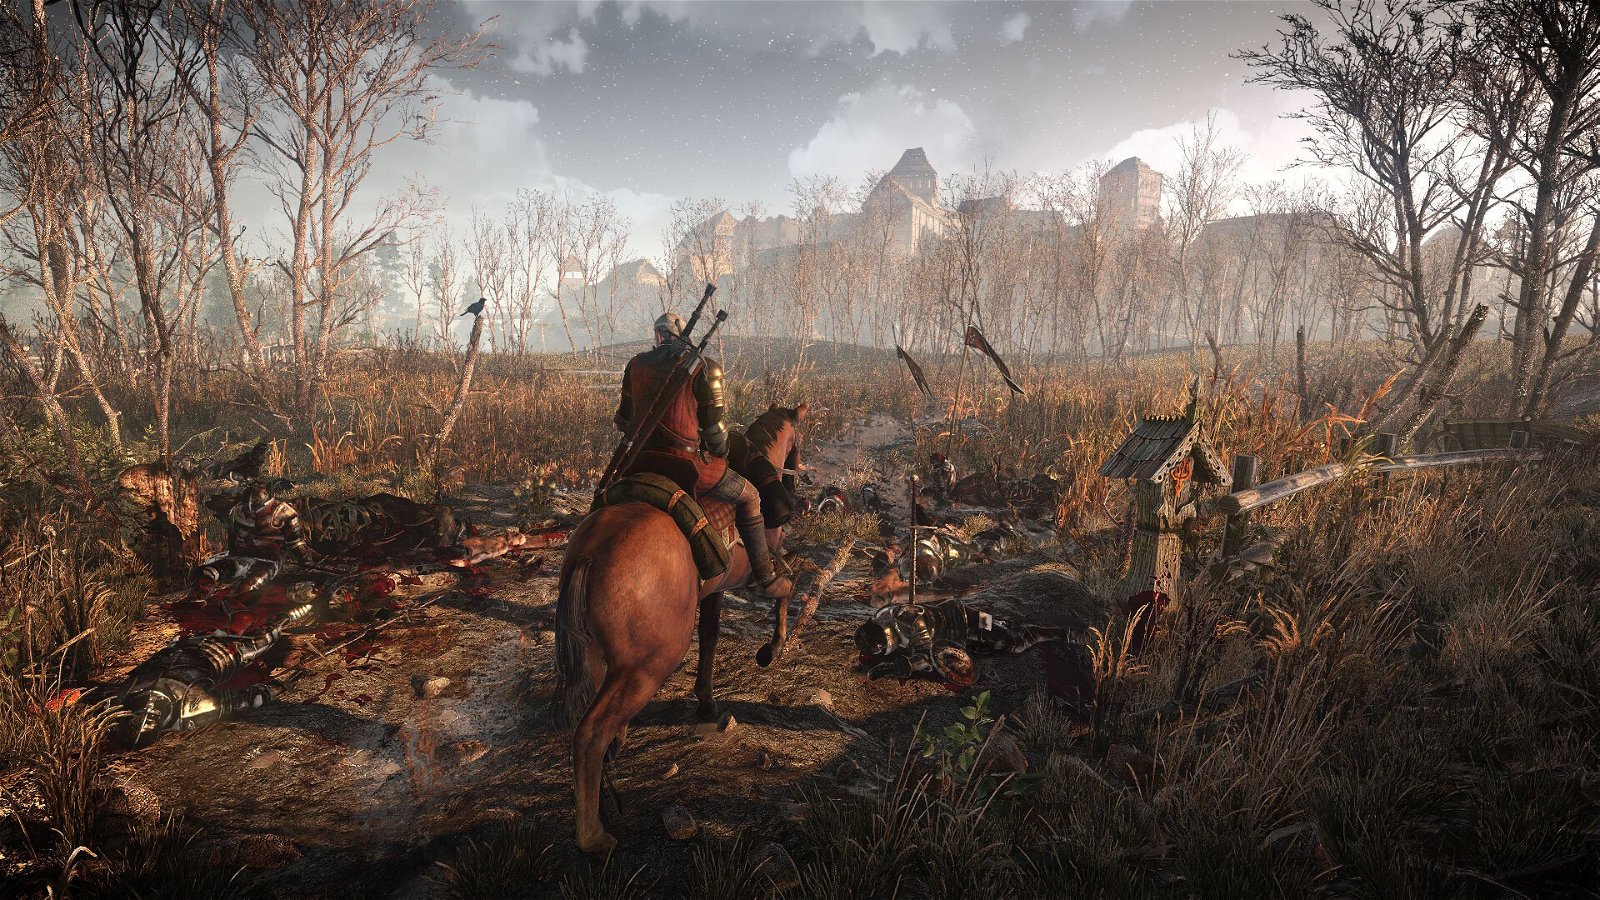 The Witcher Iii: Wild Hunt (Ps4) Review - 2015-05-25 09:54:43